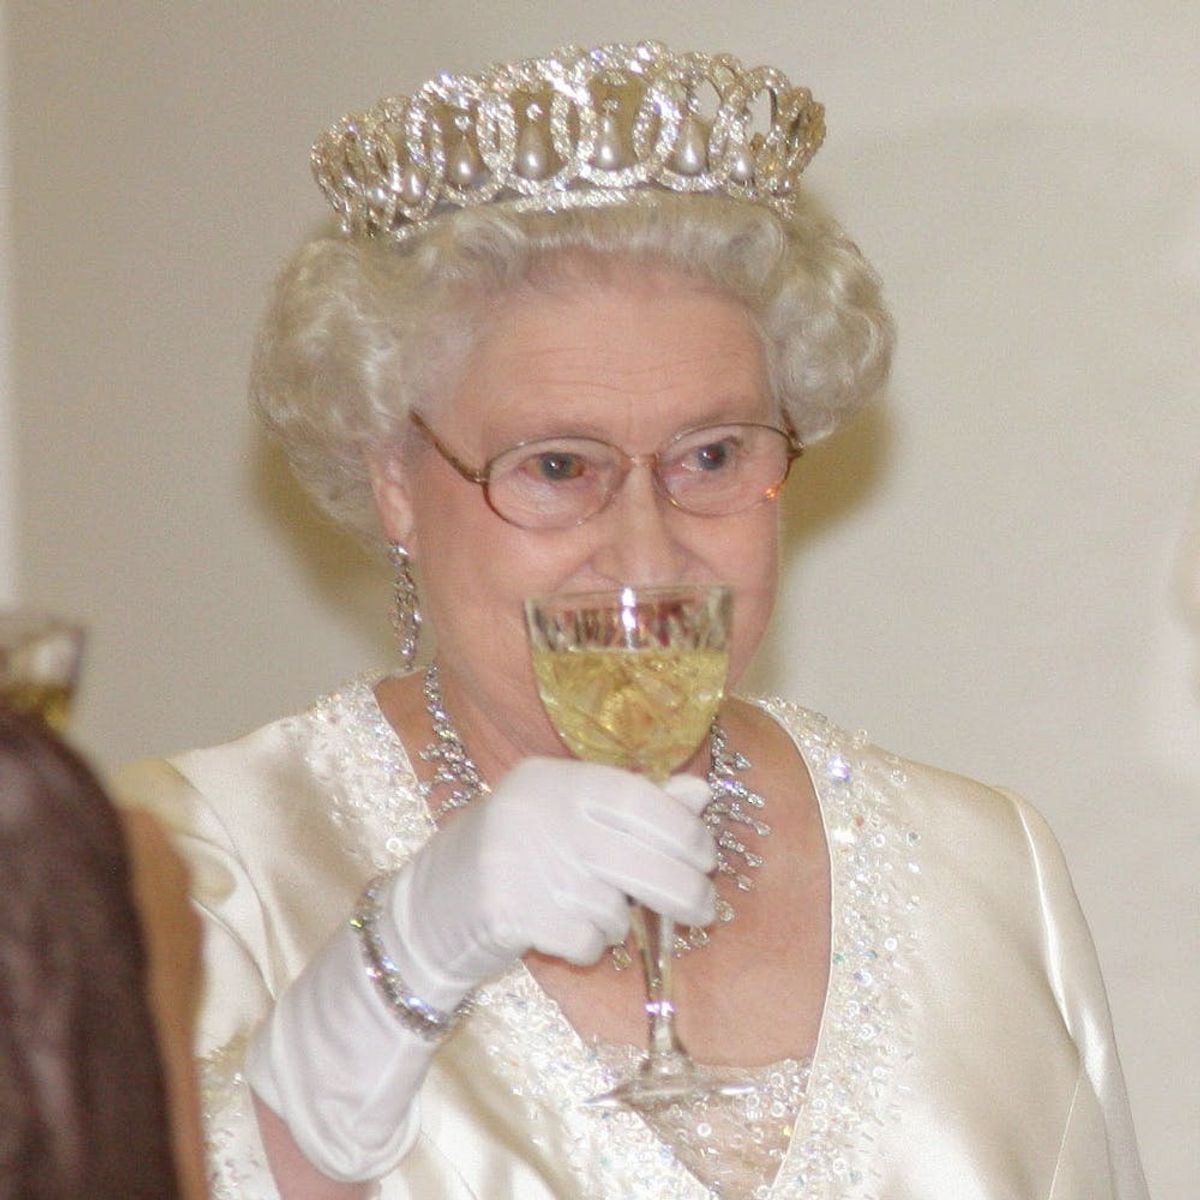 You Won’t Believe the Unexpected Way the Queen Is Making Extra Money